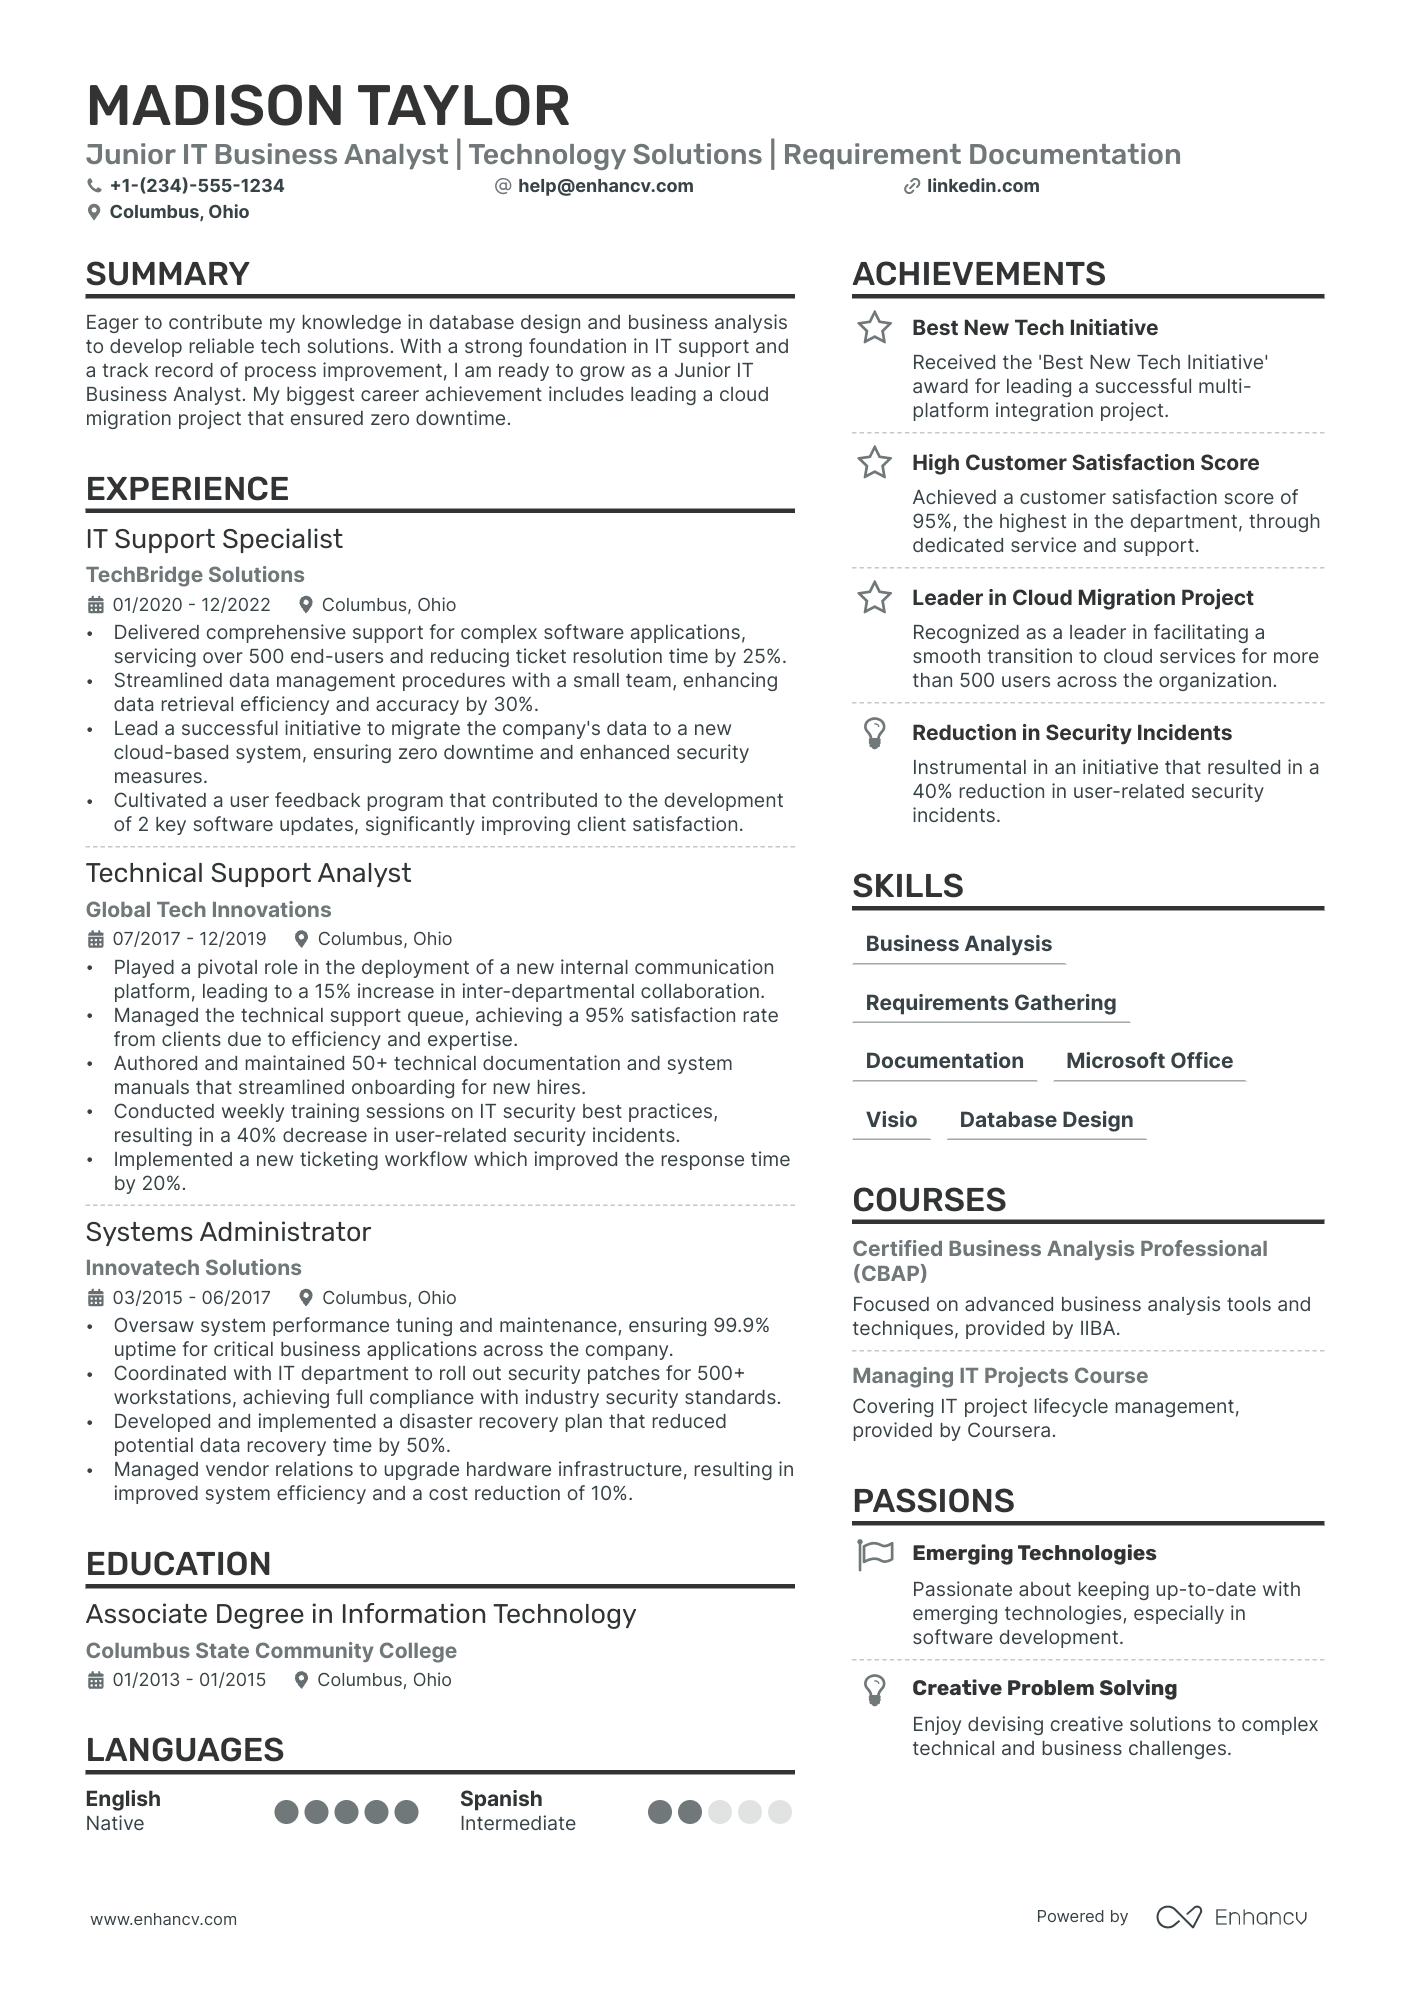 IT Business Analyst resume example